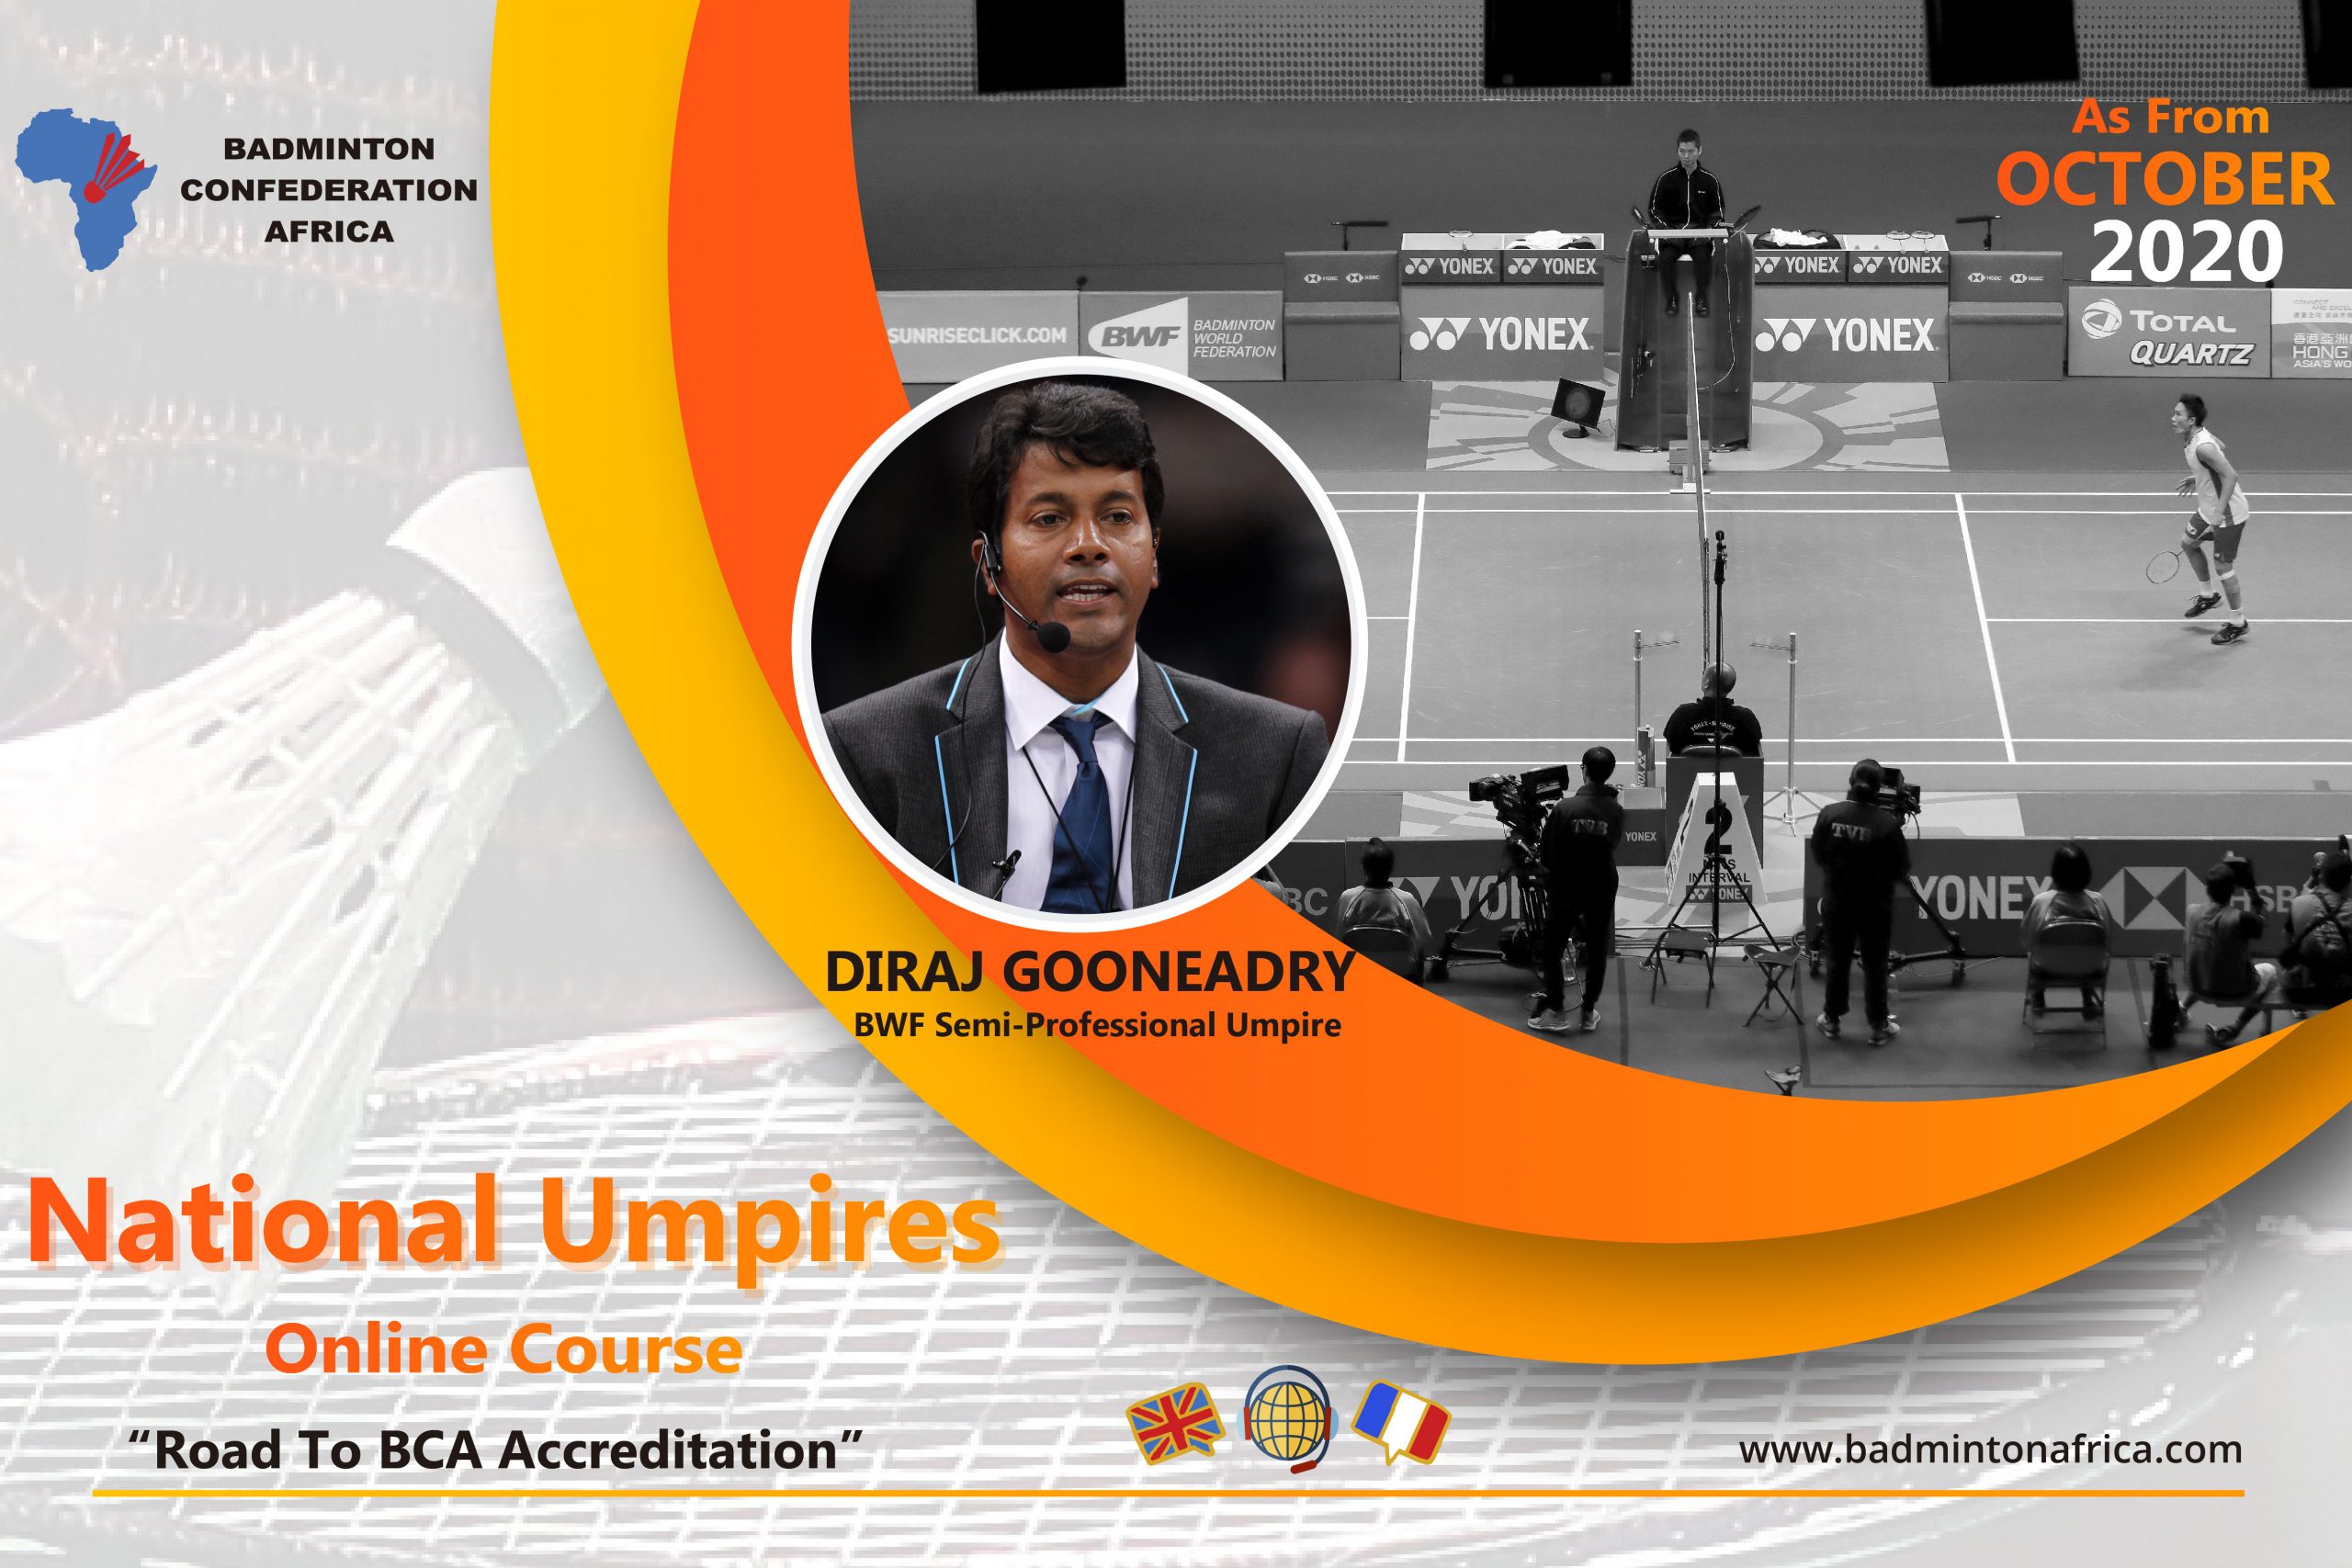 Online Umpires Course – “Road to BCA Accreditation”